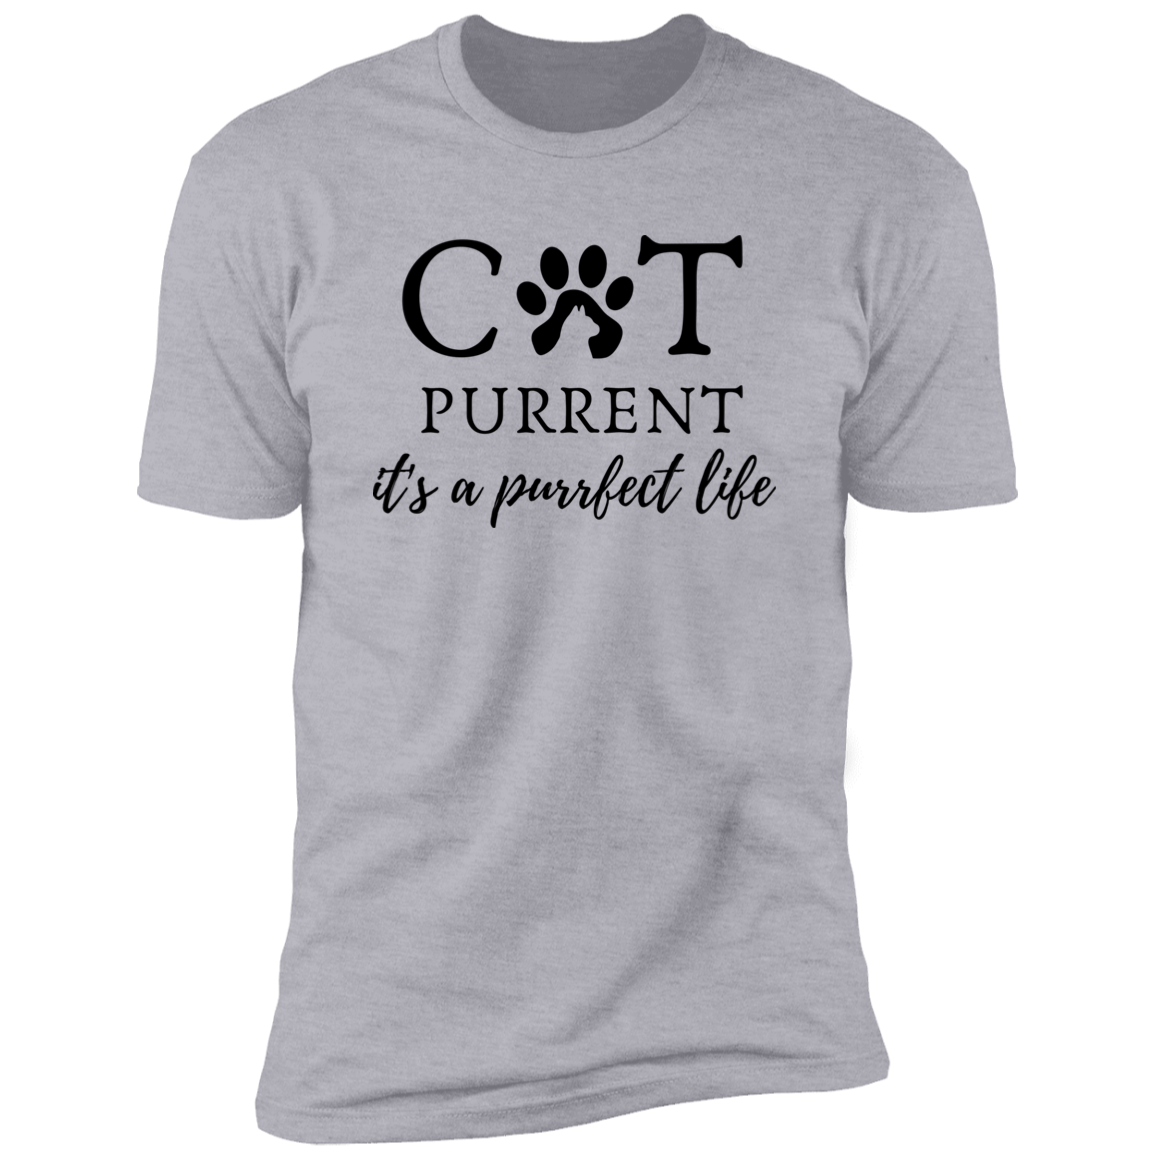 Cat Purrent It's a Purrfect Life T-shirt, Cat Parent Shirt for humans, in light heather gray